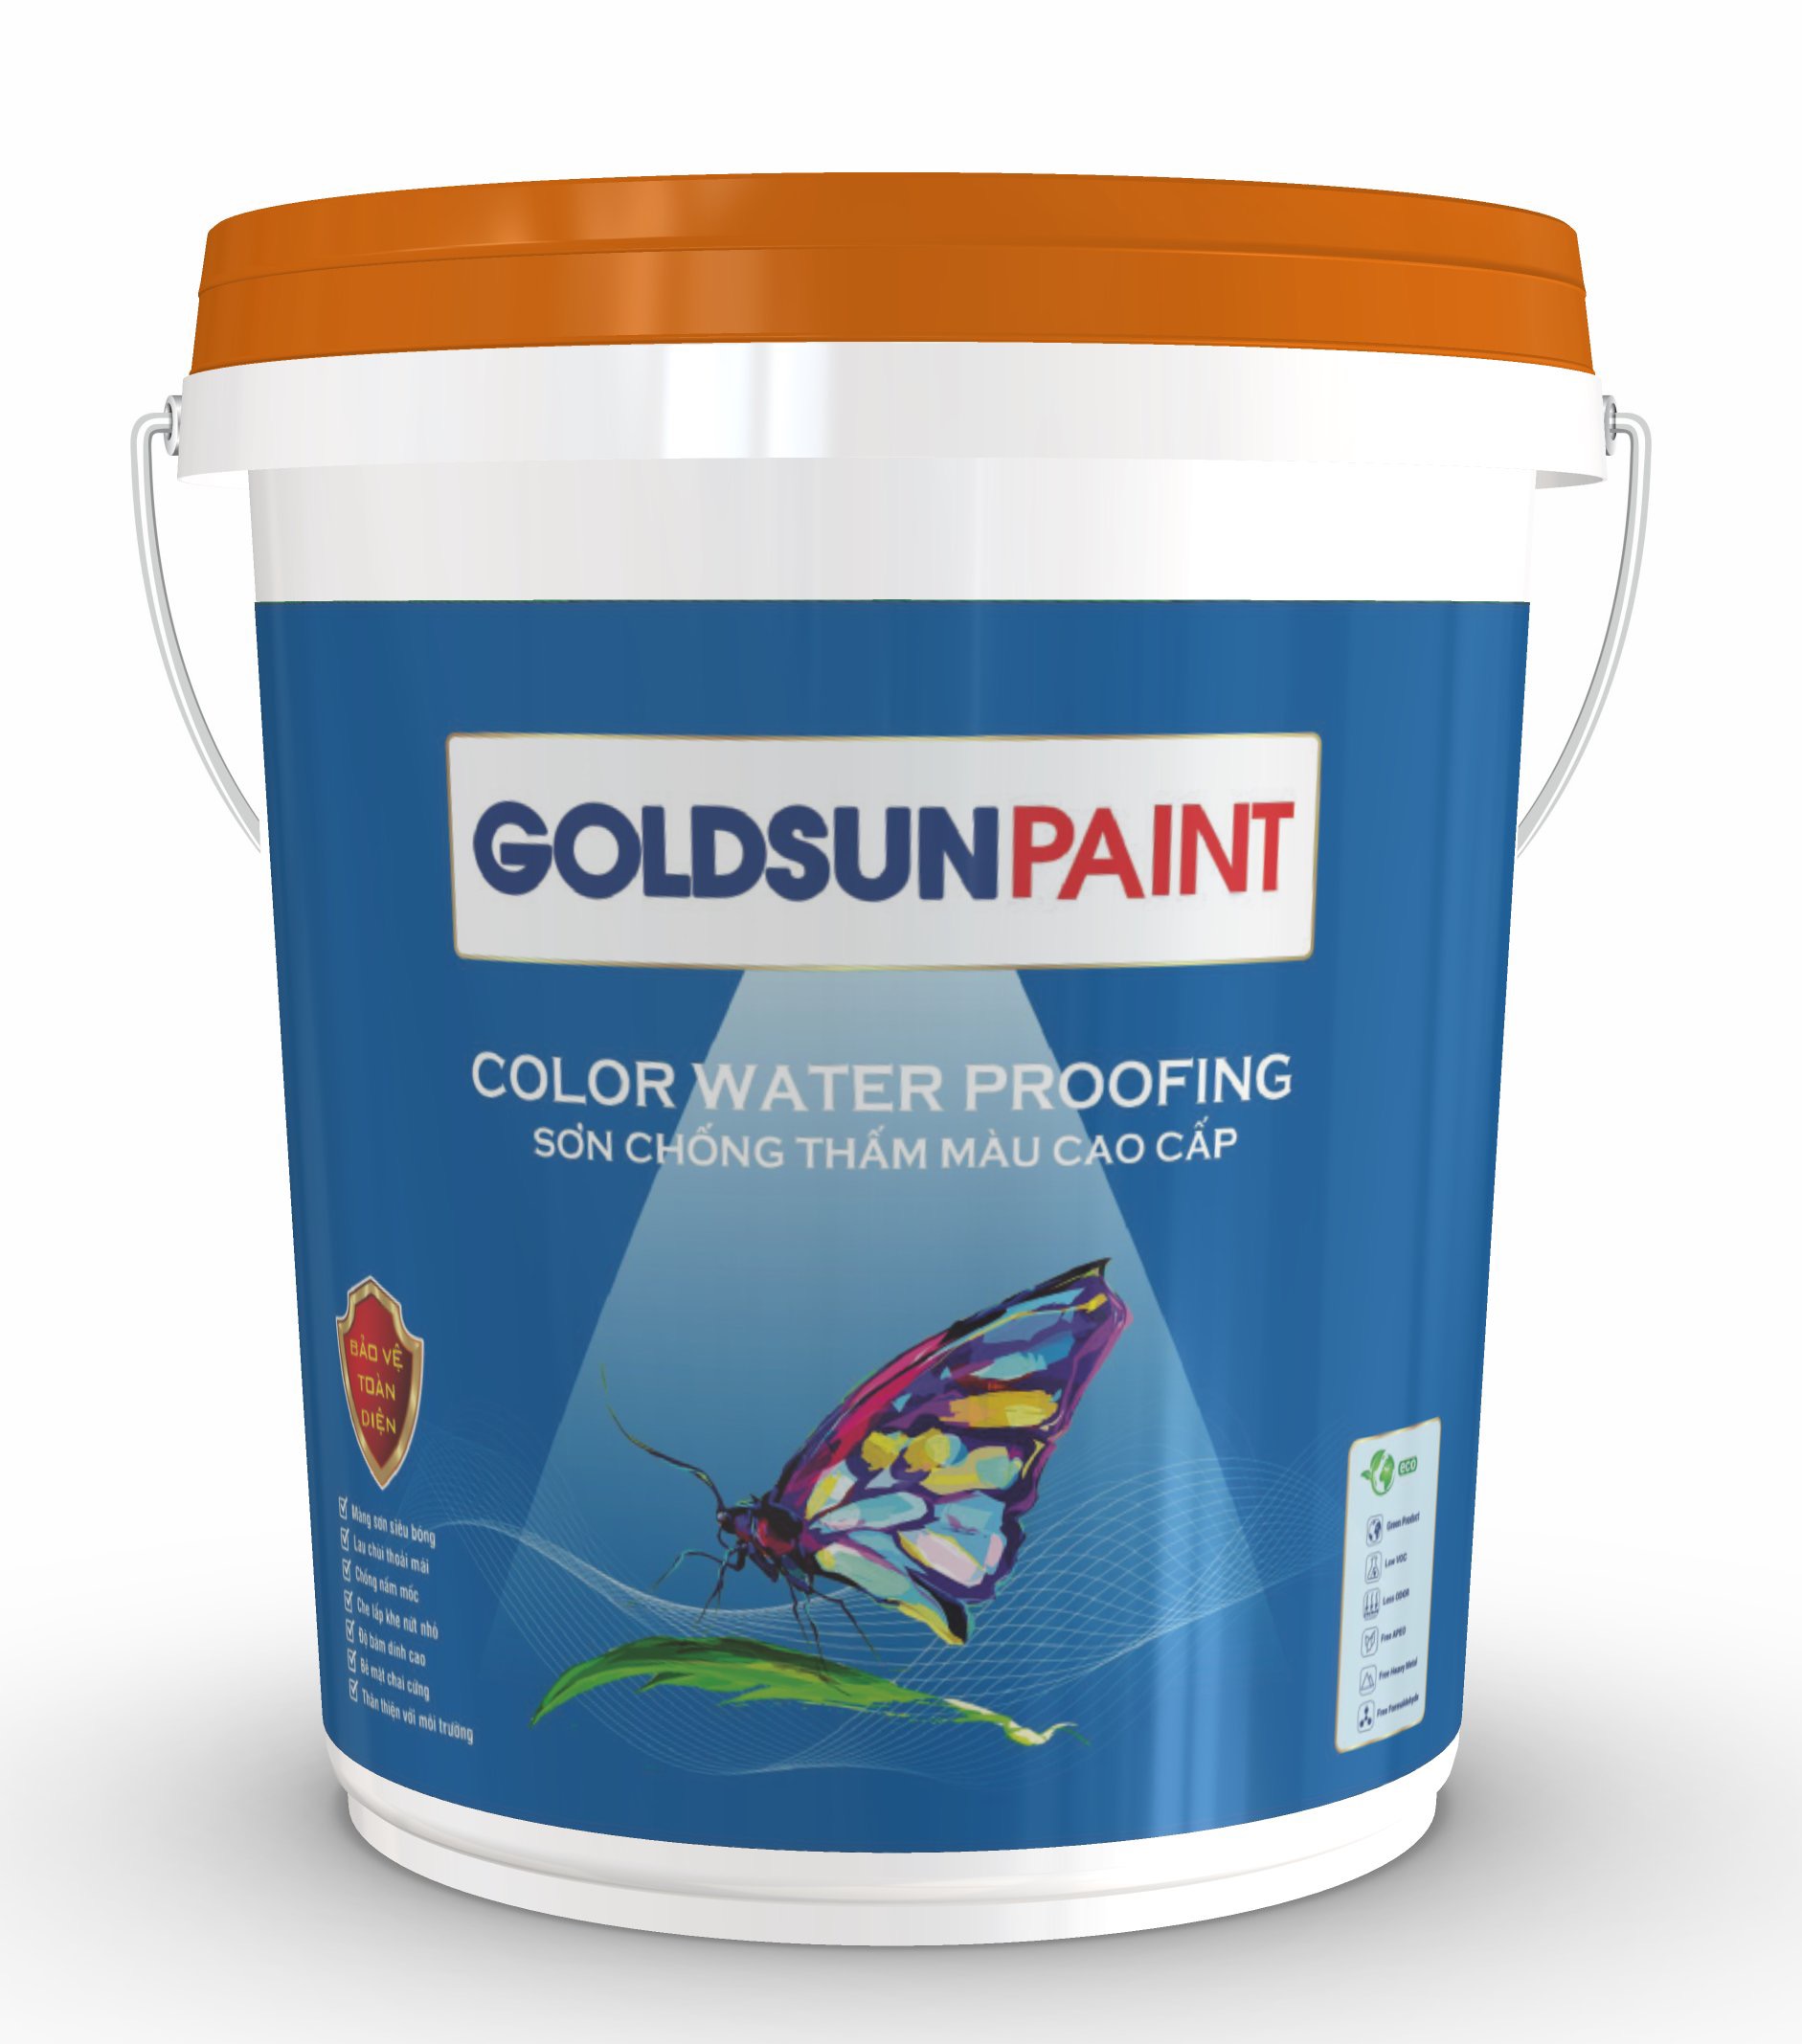 COLOR WATER PROOFING - Sơn chống thấm màu cao cấp